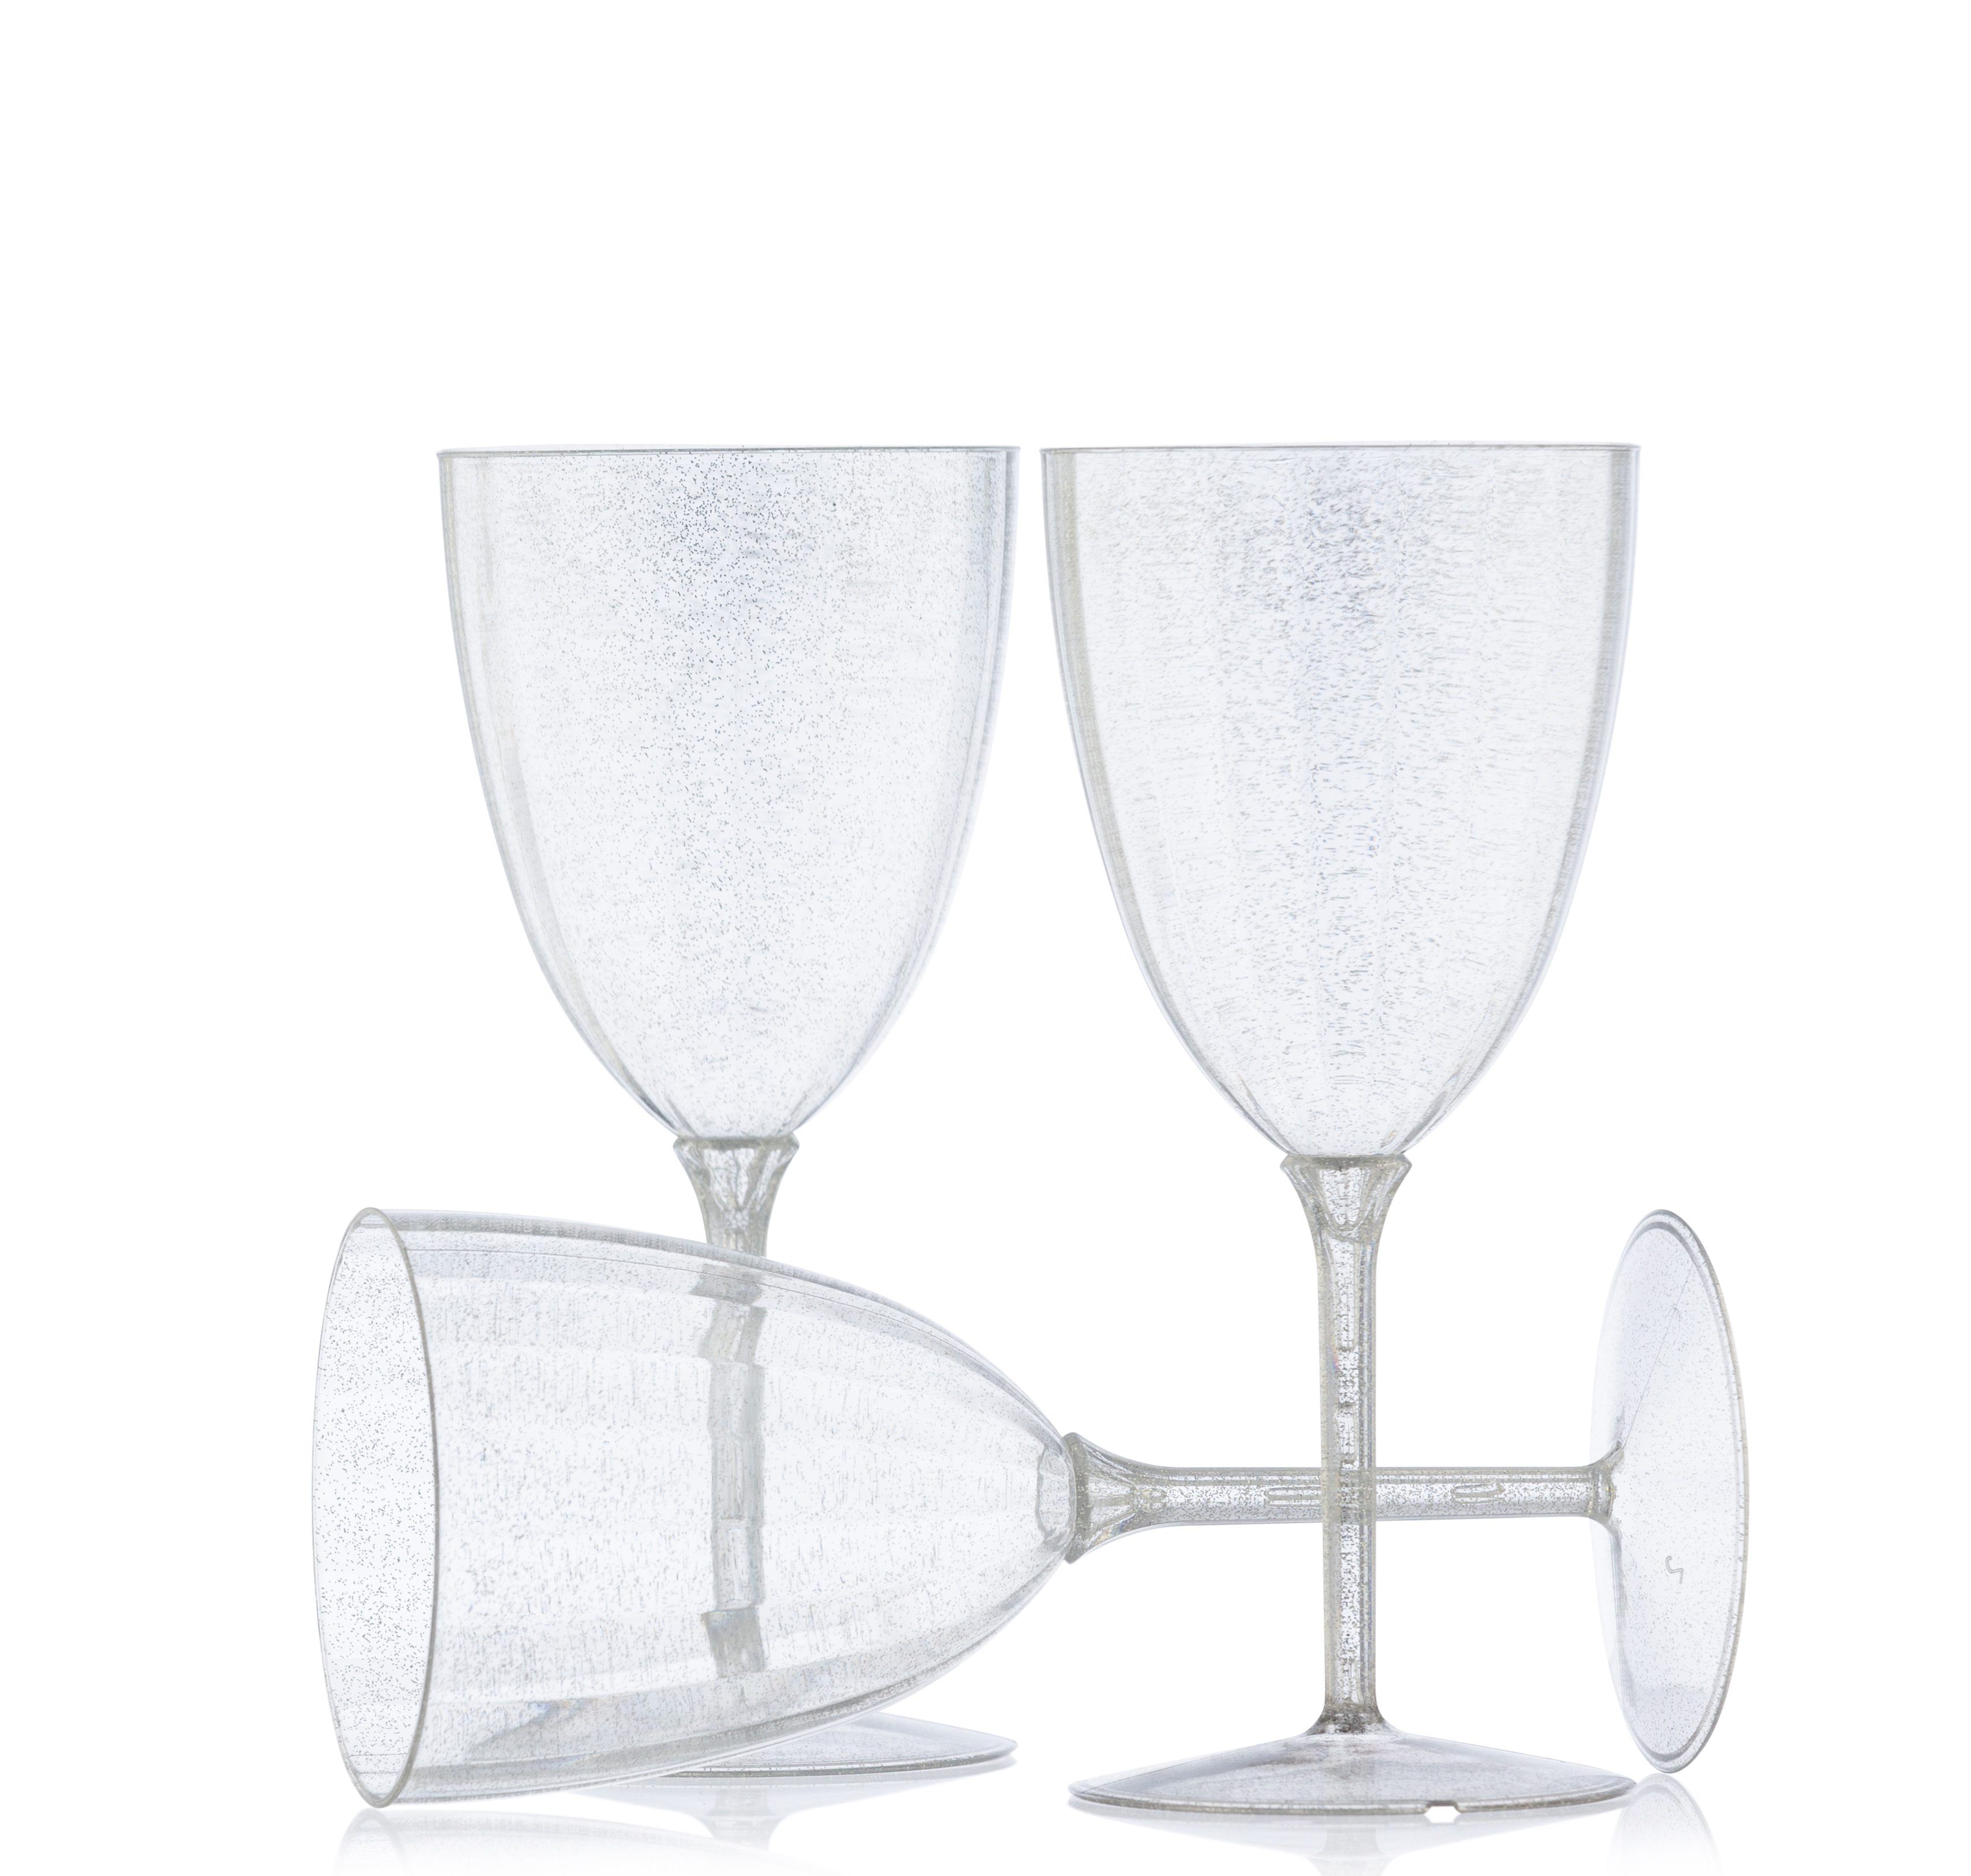 True Party Disposable Plastic Wine Glasses, Stemmed Clear Plastic